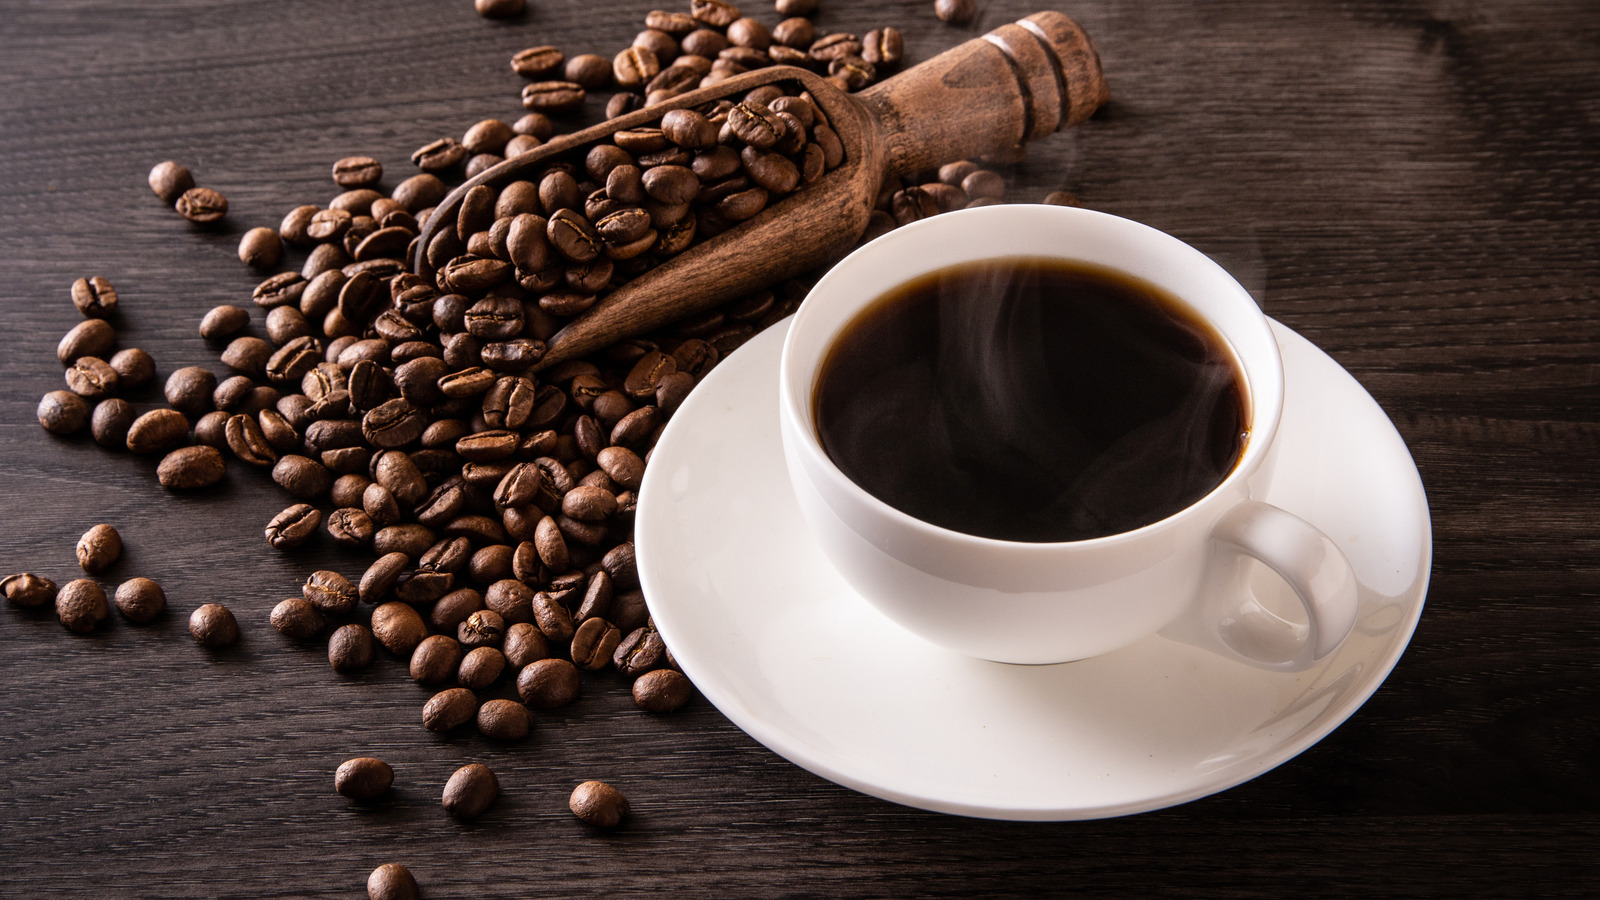 Private brands of coffee are purchased because they're preferred